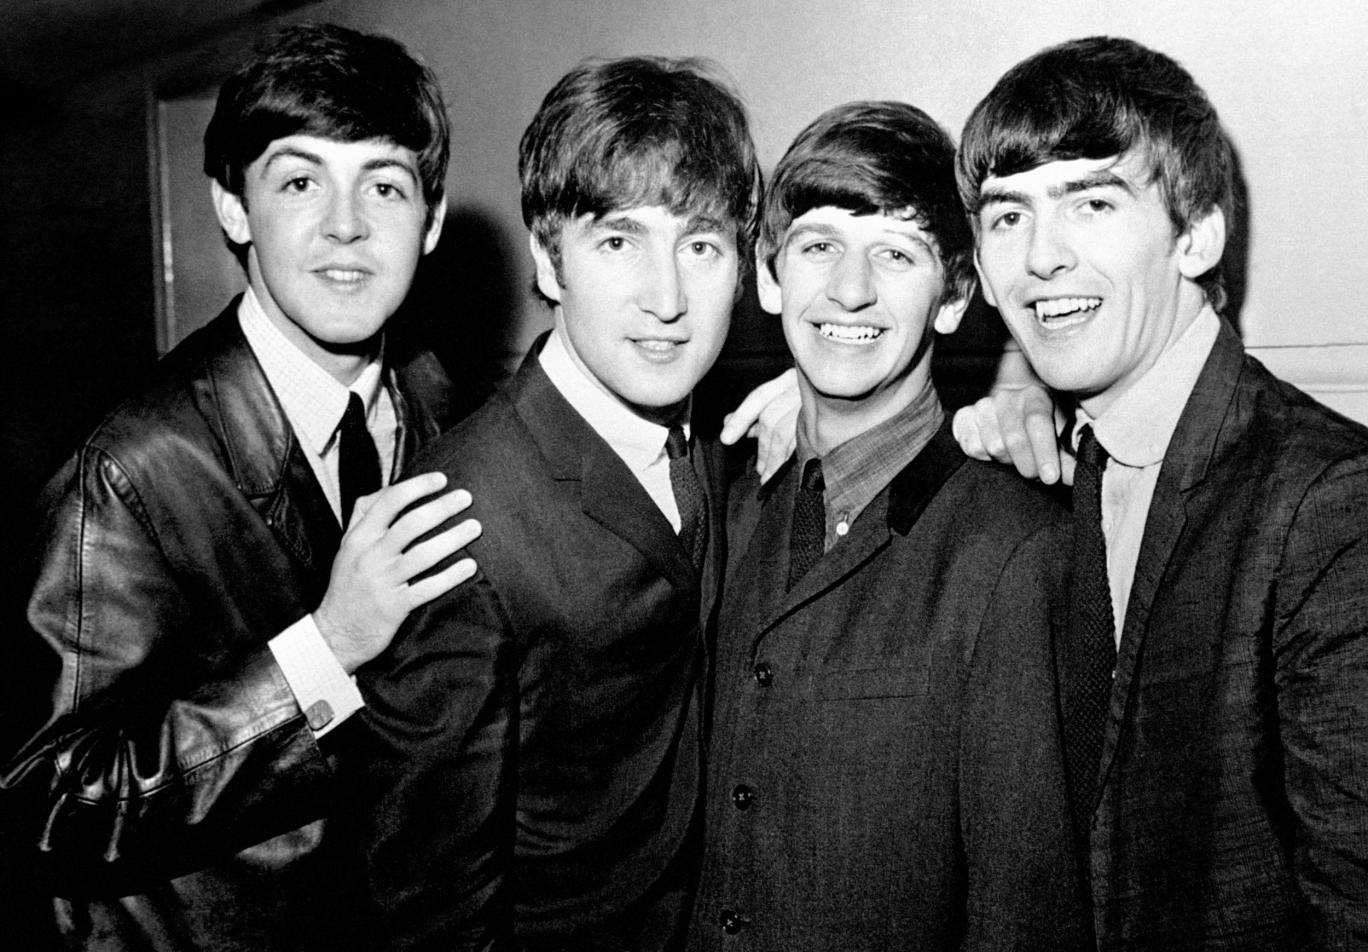 Can You Complete the Lyrics of 'Hey Jude'? Quiz beatles171